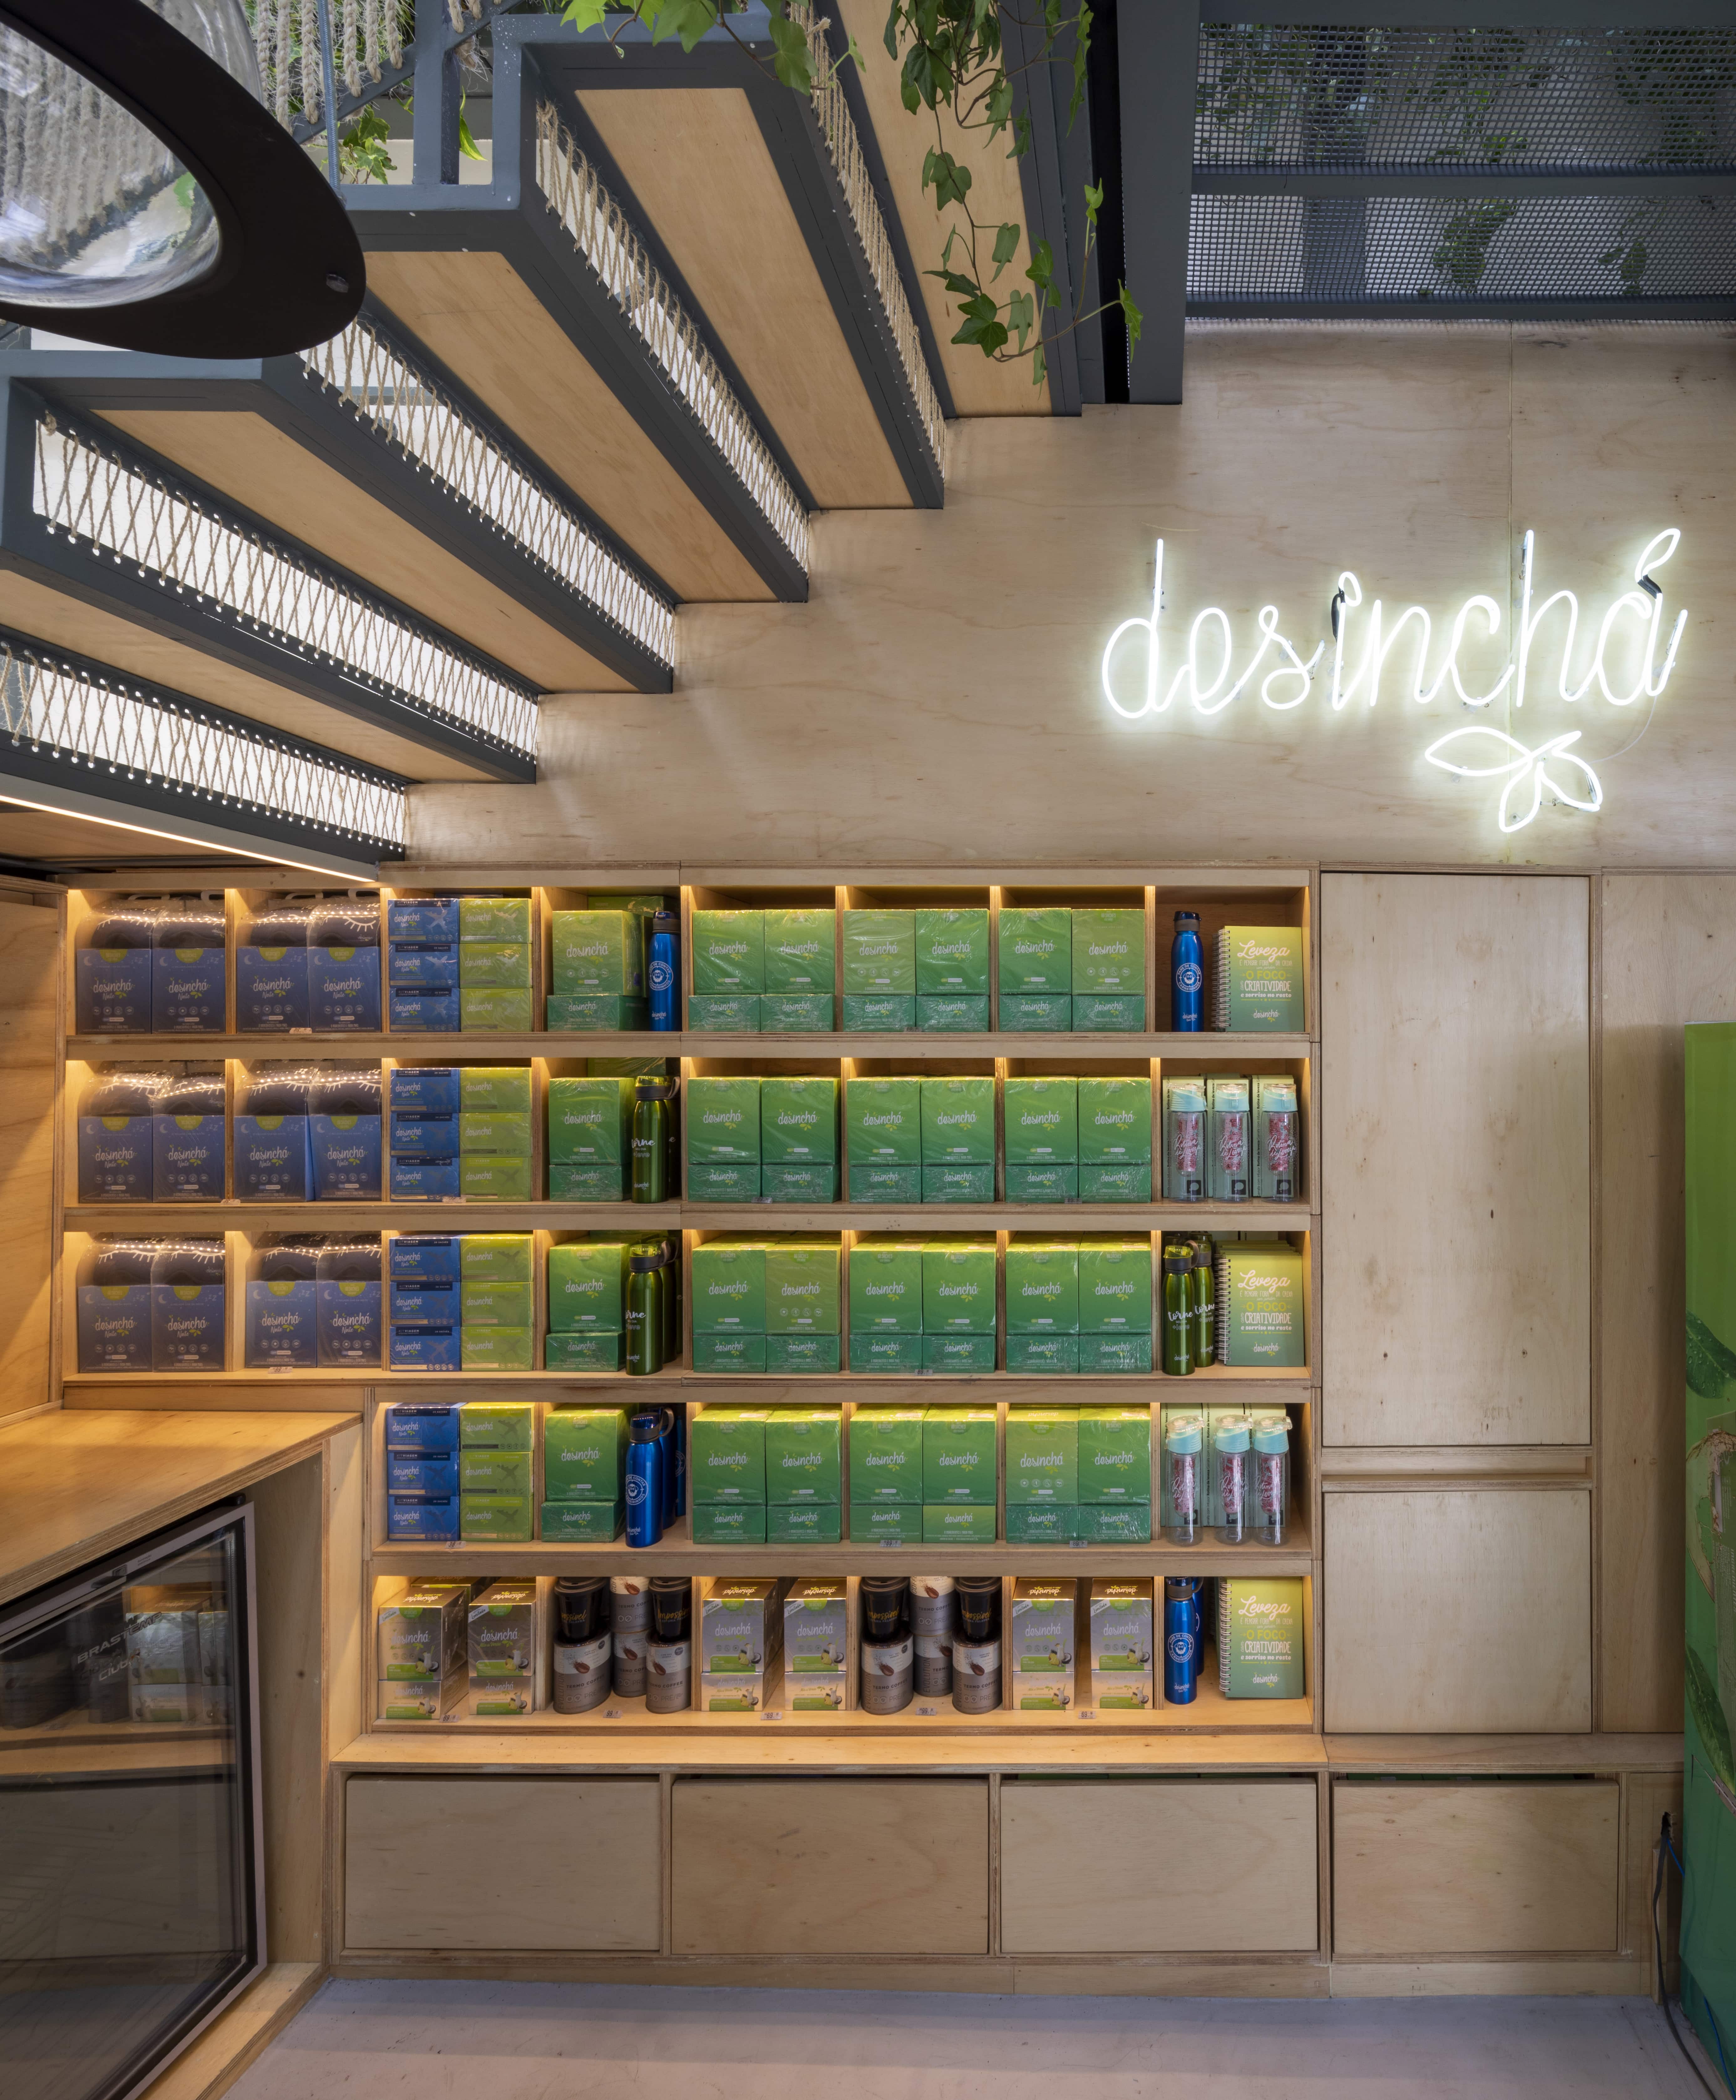 Every corner of Desinchá Flagship is optimally utilized for storage